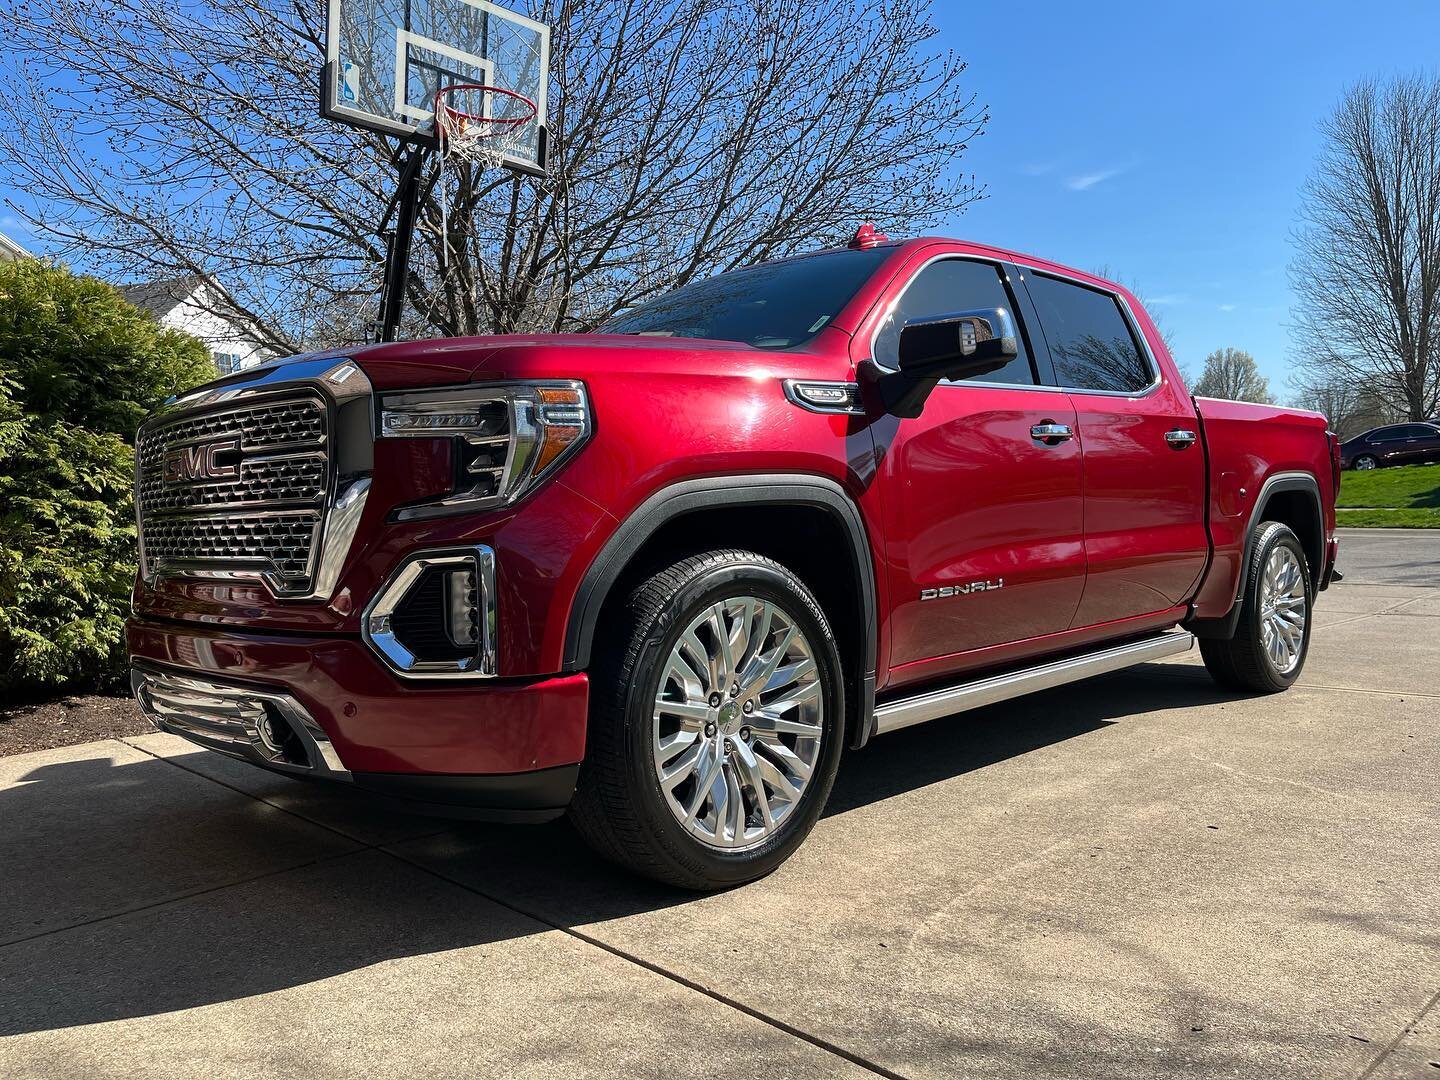 His and hers 🧼.. Why get one car detailed when you can get two? Our team can have two vehicles detailed in under 4 hours 🤯. If you are looking for top of the line Mobile detailing we are the best team for you. Give us a call 463-701-2510 or check o